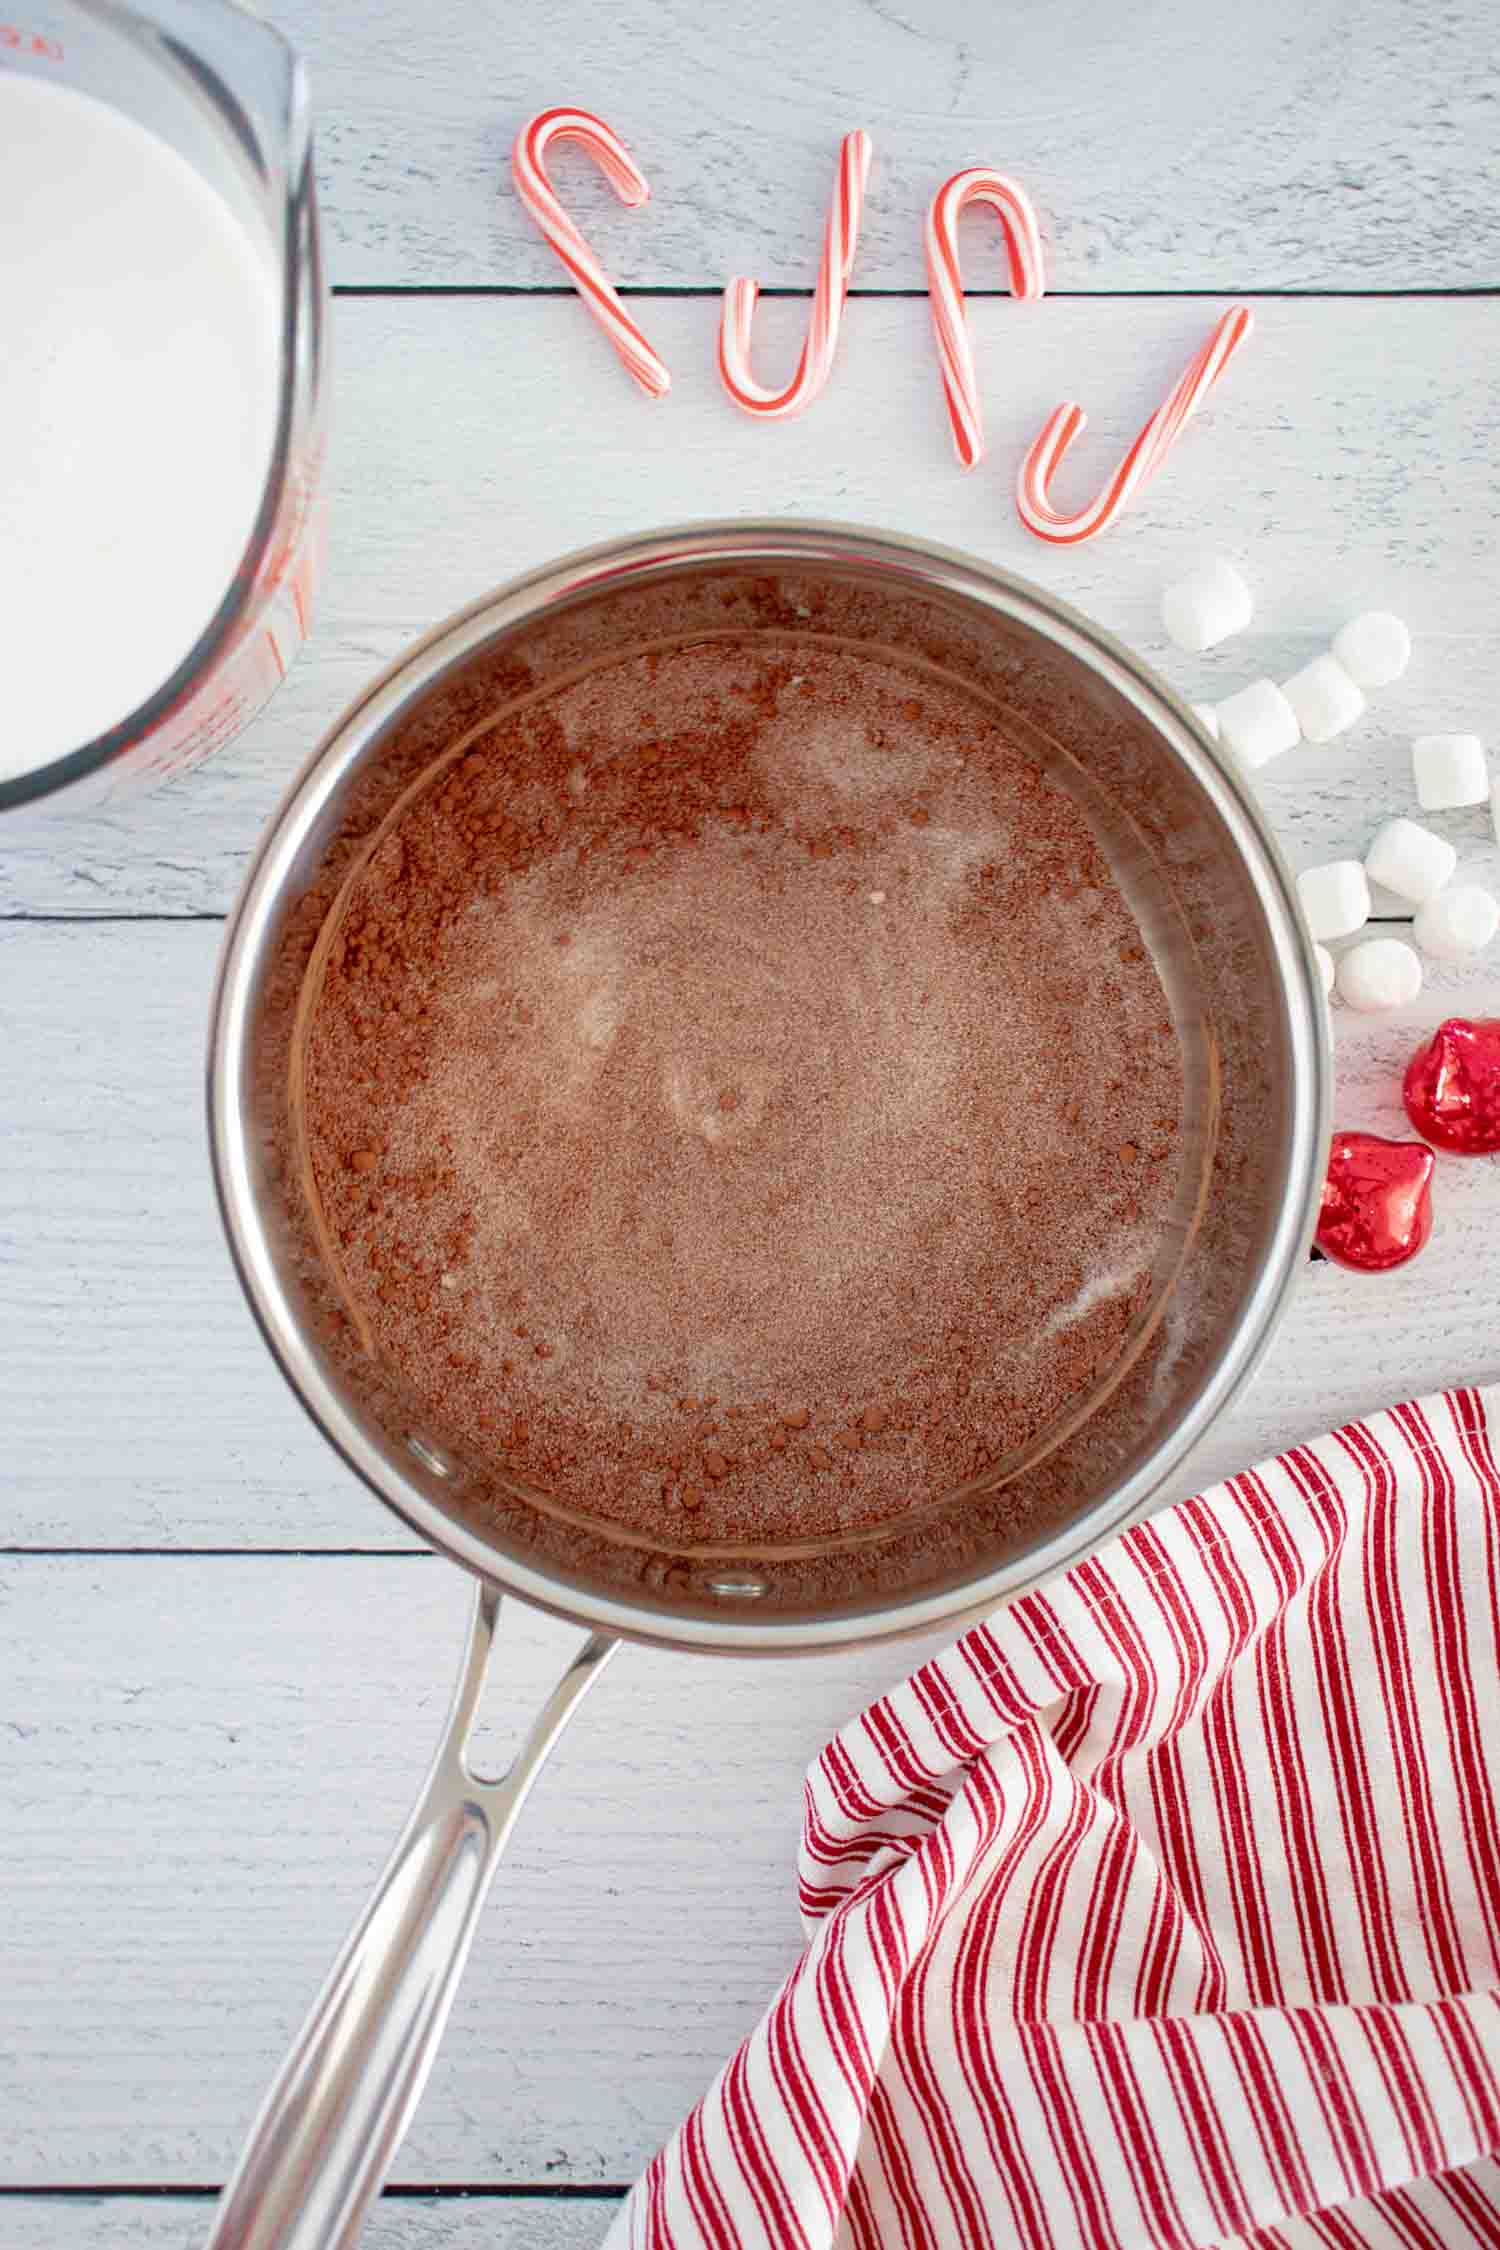 A metal pan with hot chocolate in it with a measuring cup of milk, candy canes, marshmallows, ornaments and a red striped towel next to it.